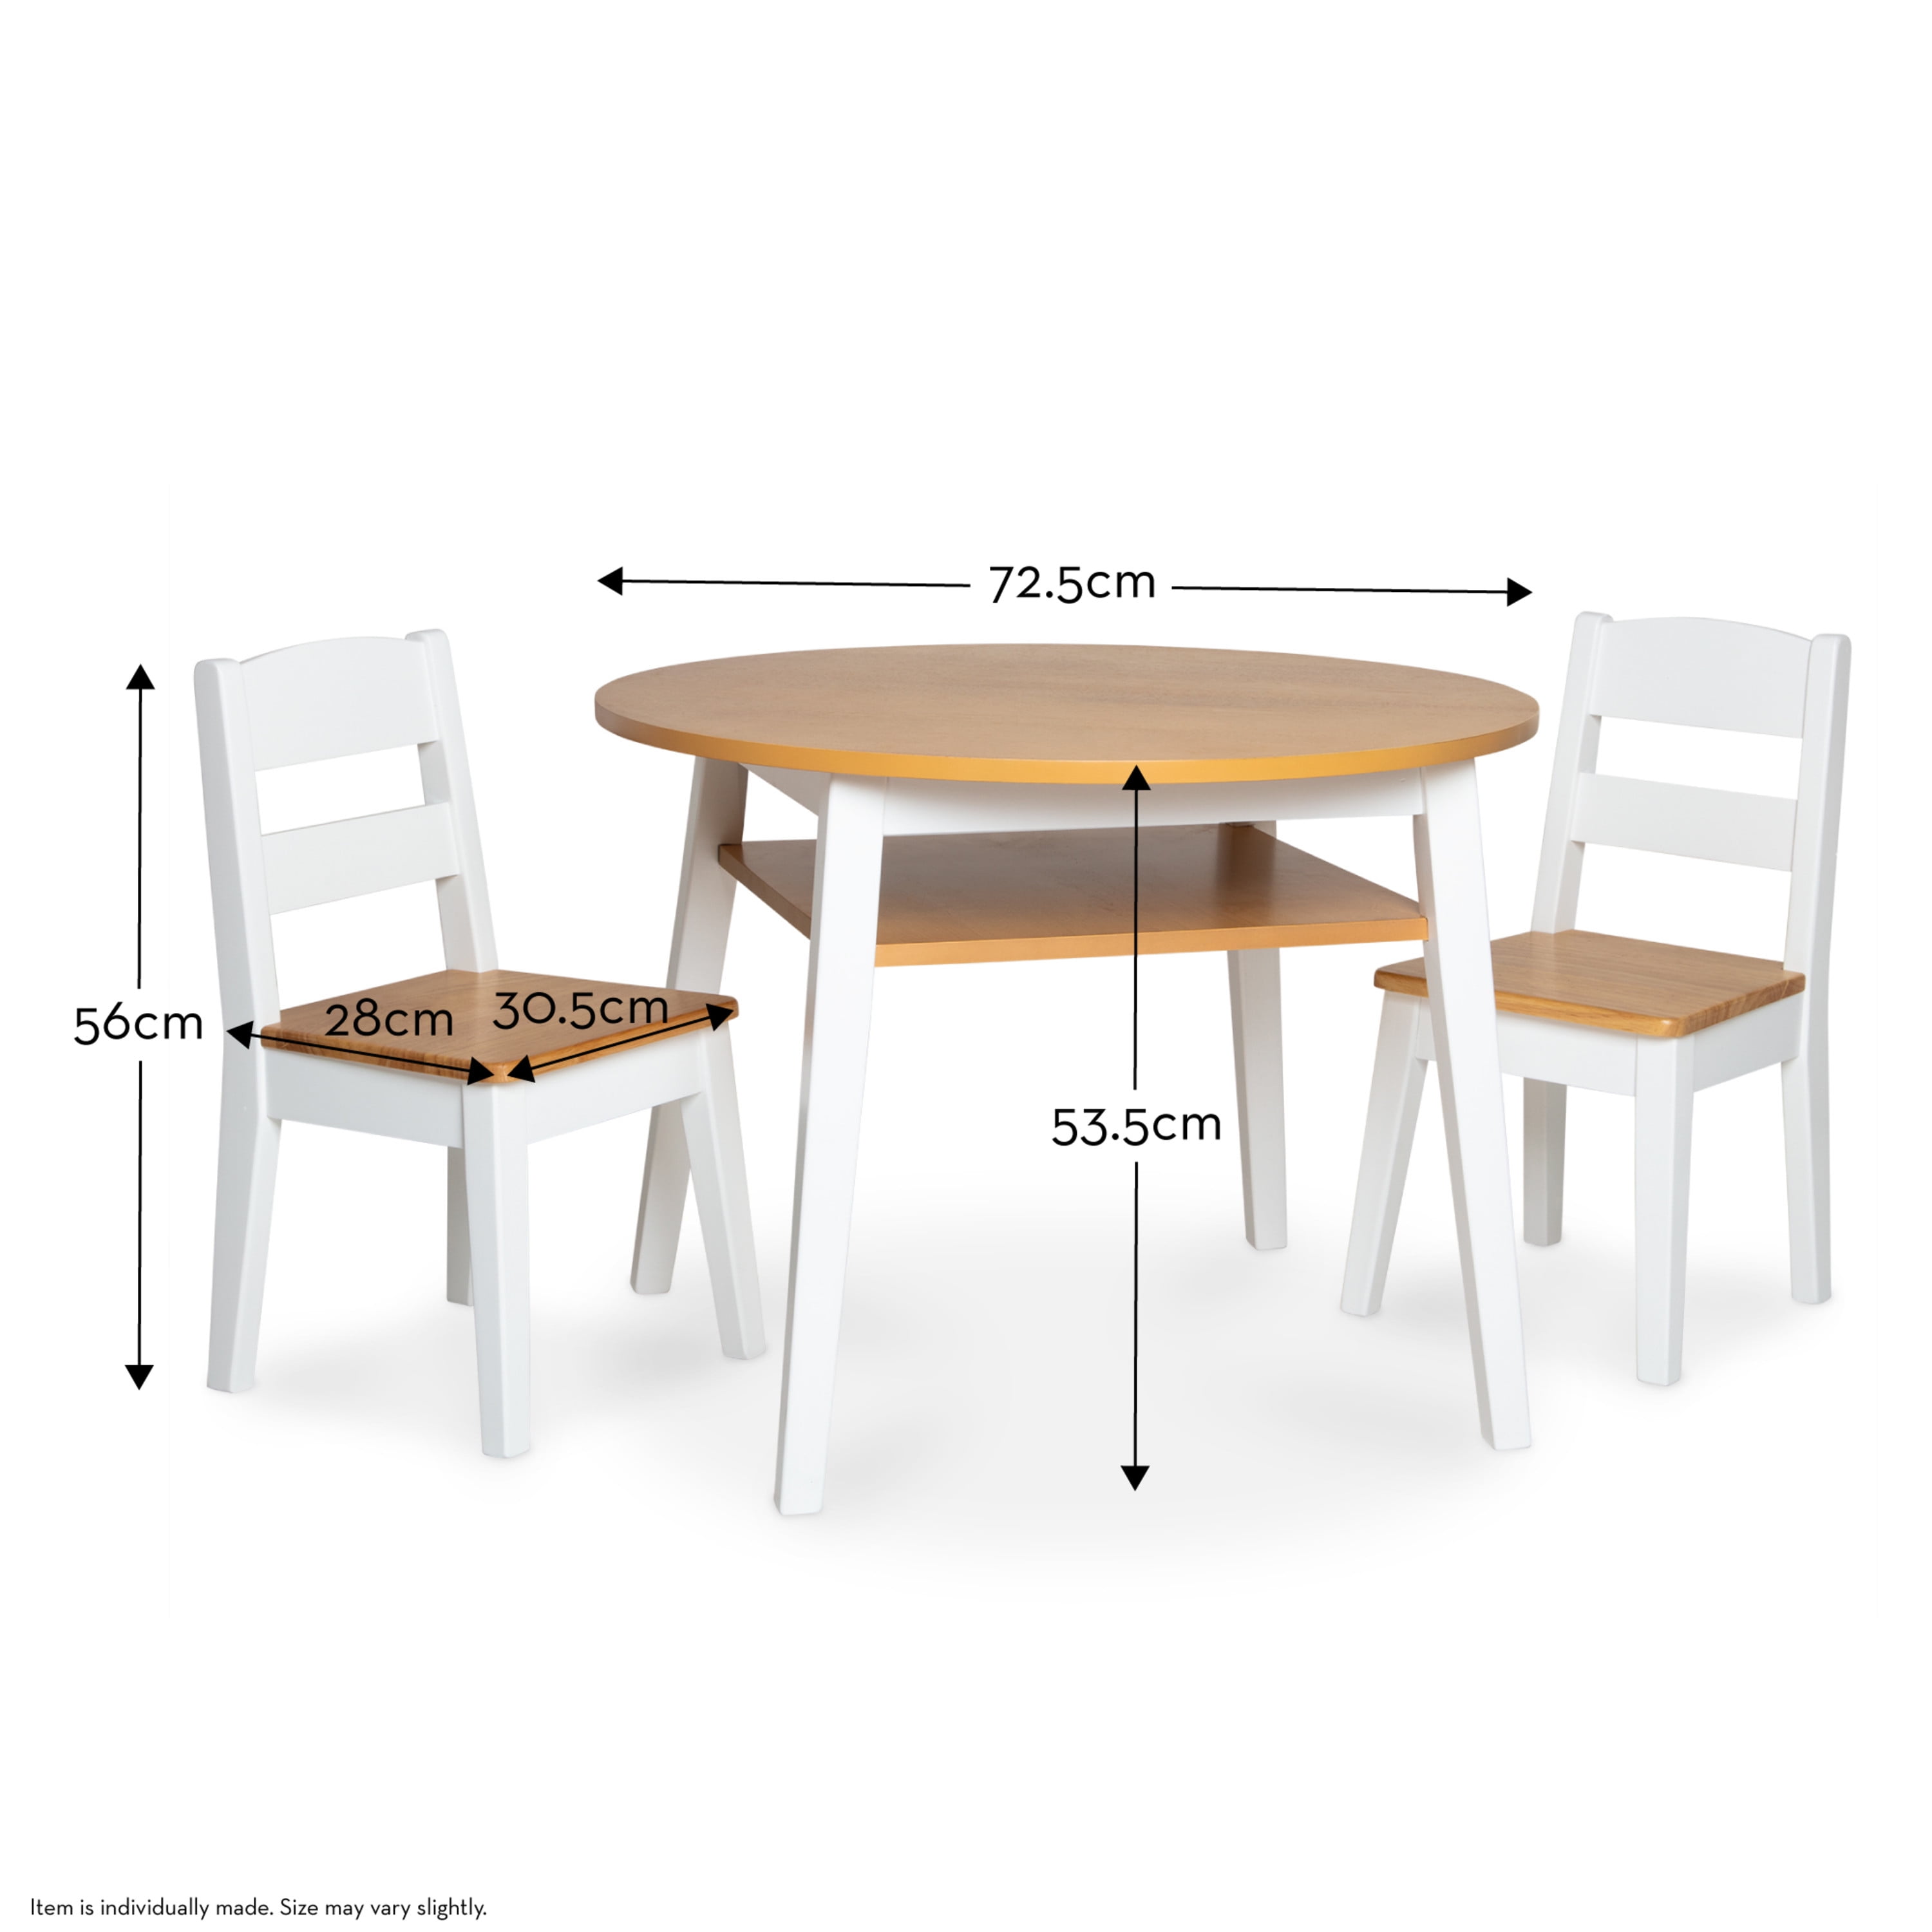 REVIEW: Melissa & Doug Wooden Art Table and 2 Chairs Set review – Light  Woodgrain/White 